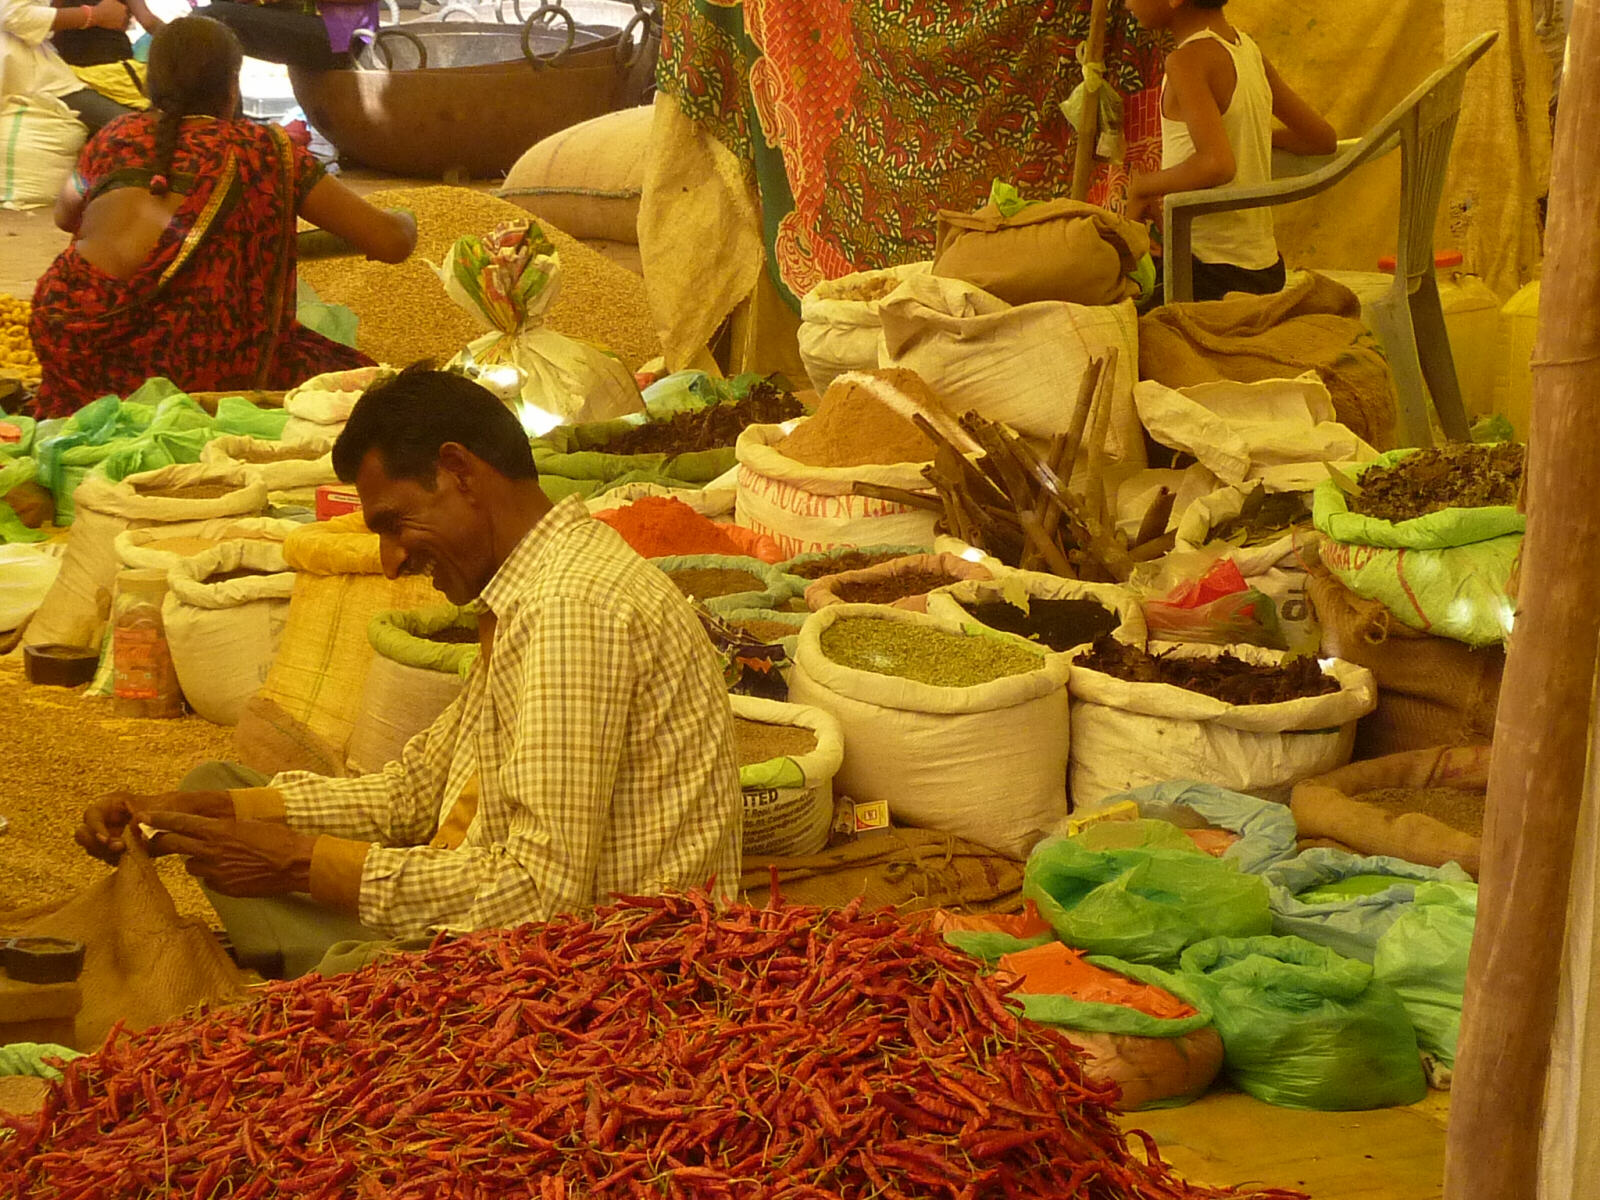 A spice stall in the 'festival market' in Khajuraho, India